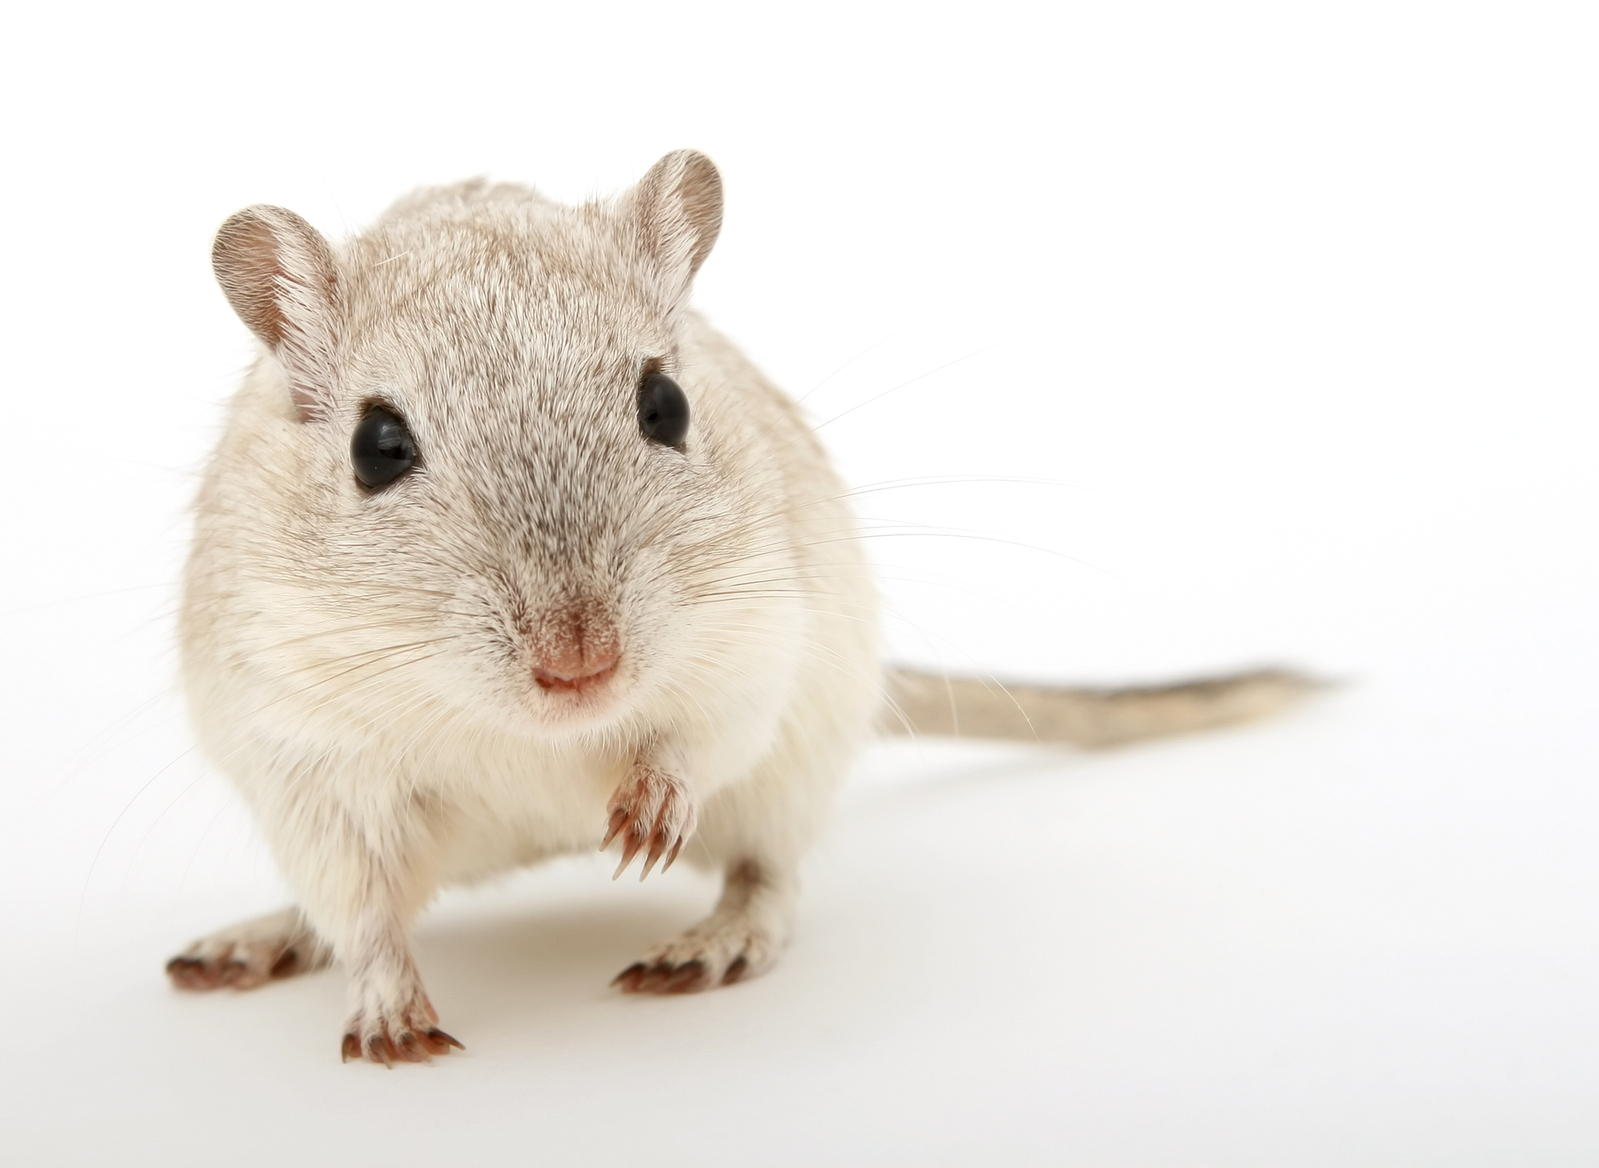 rodent isolated on white, macro closeup